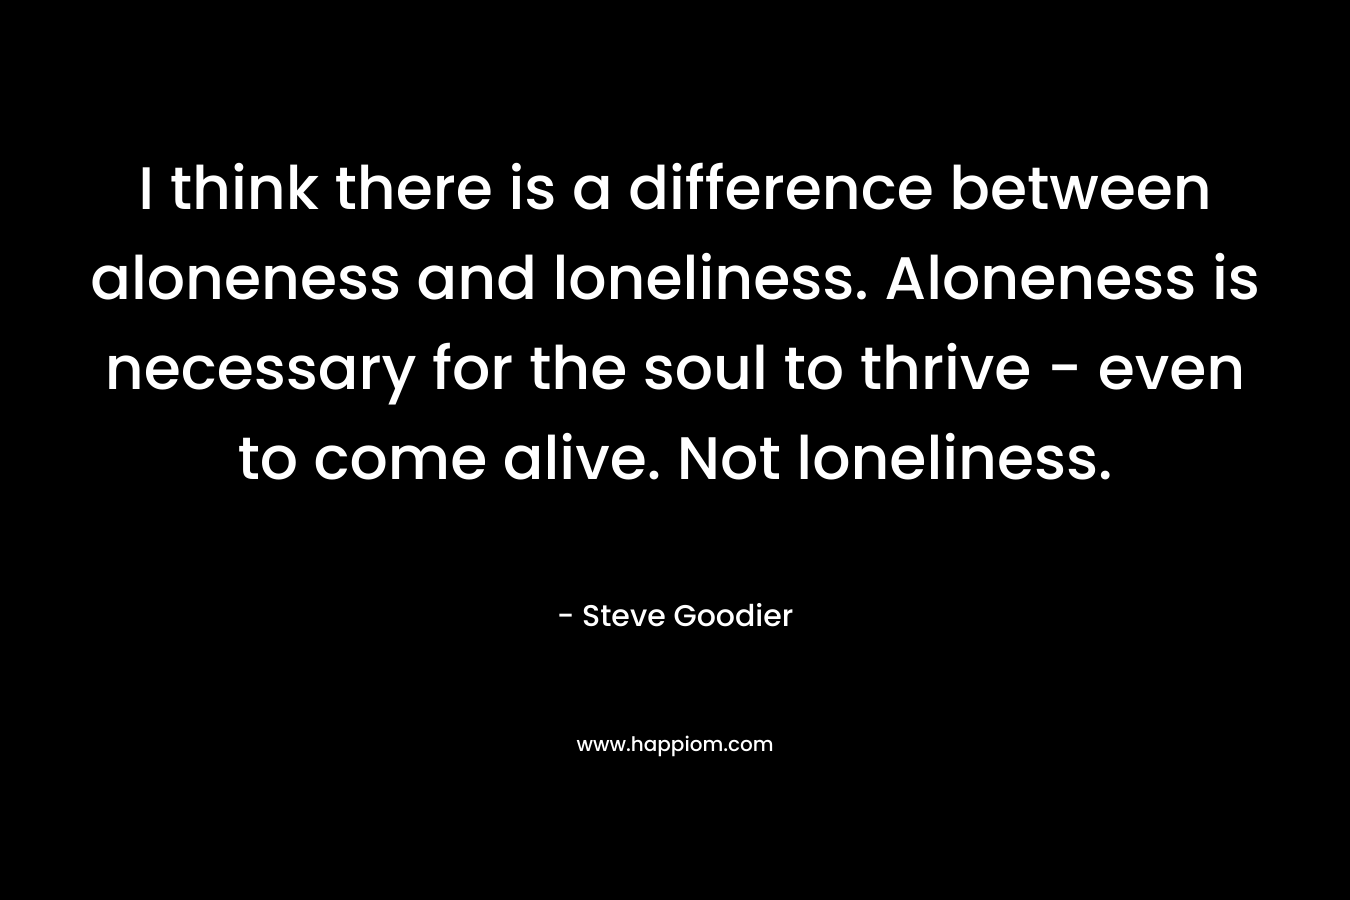 I think there is a difference between aloneness and loneliness. Aloneness is necessary for the soul to thrive – even to come alive. Not loneliness. – Steve Goodier